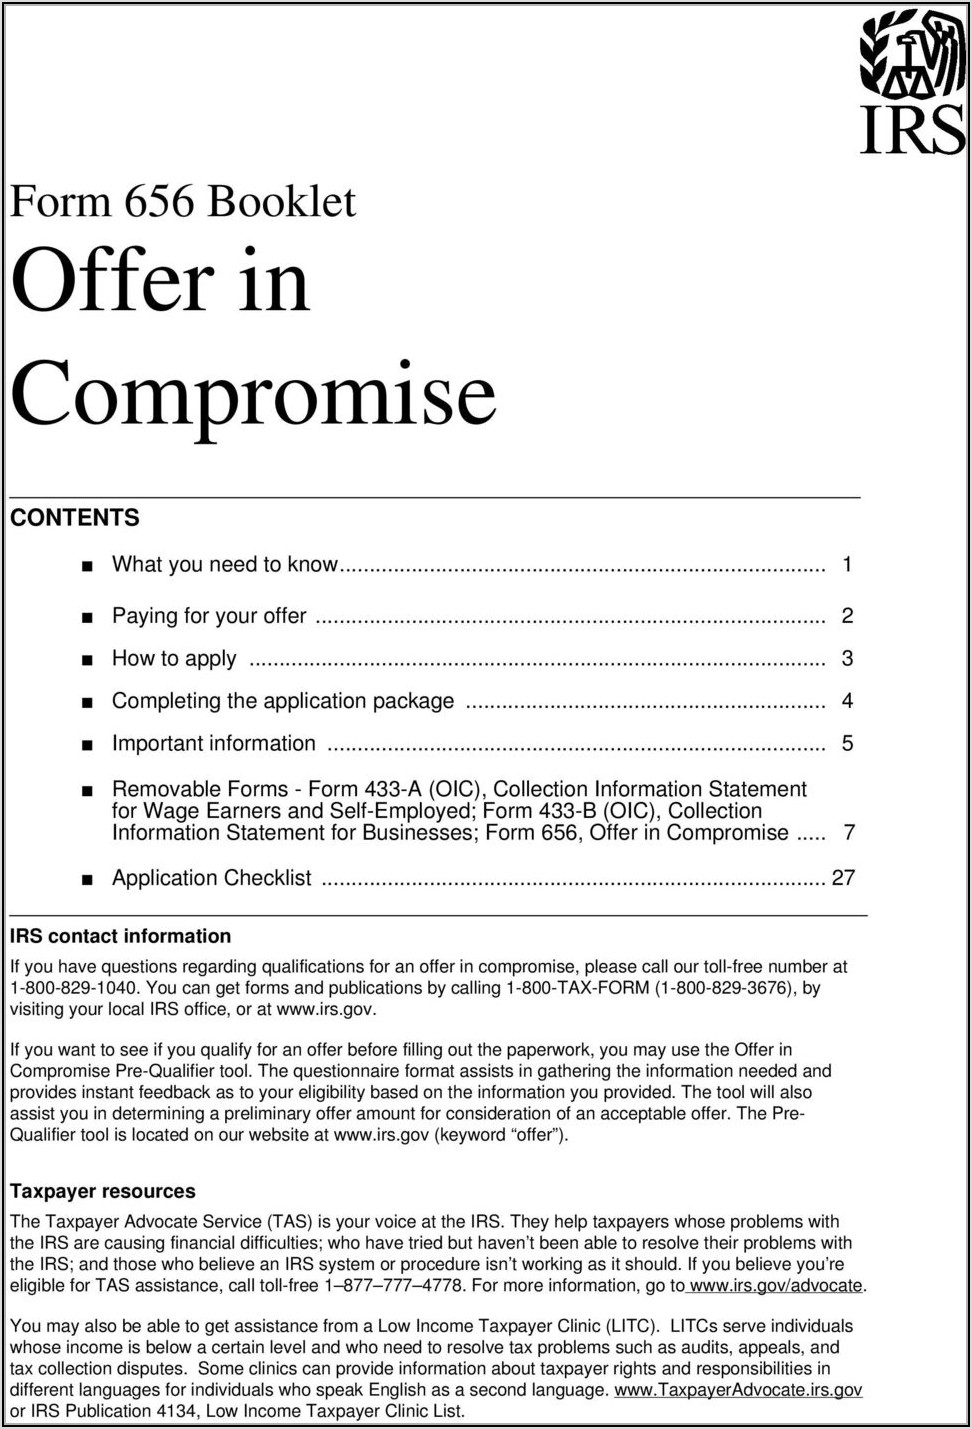 Irs Offer In Compromise Form 656 Booklet